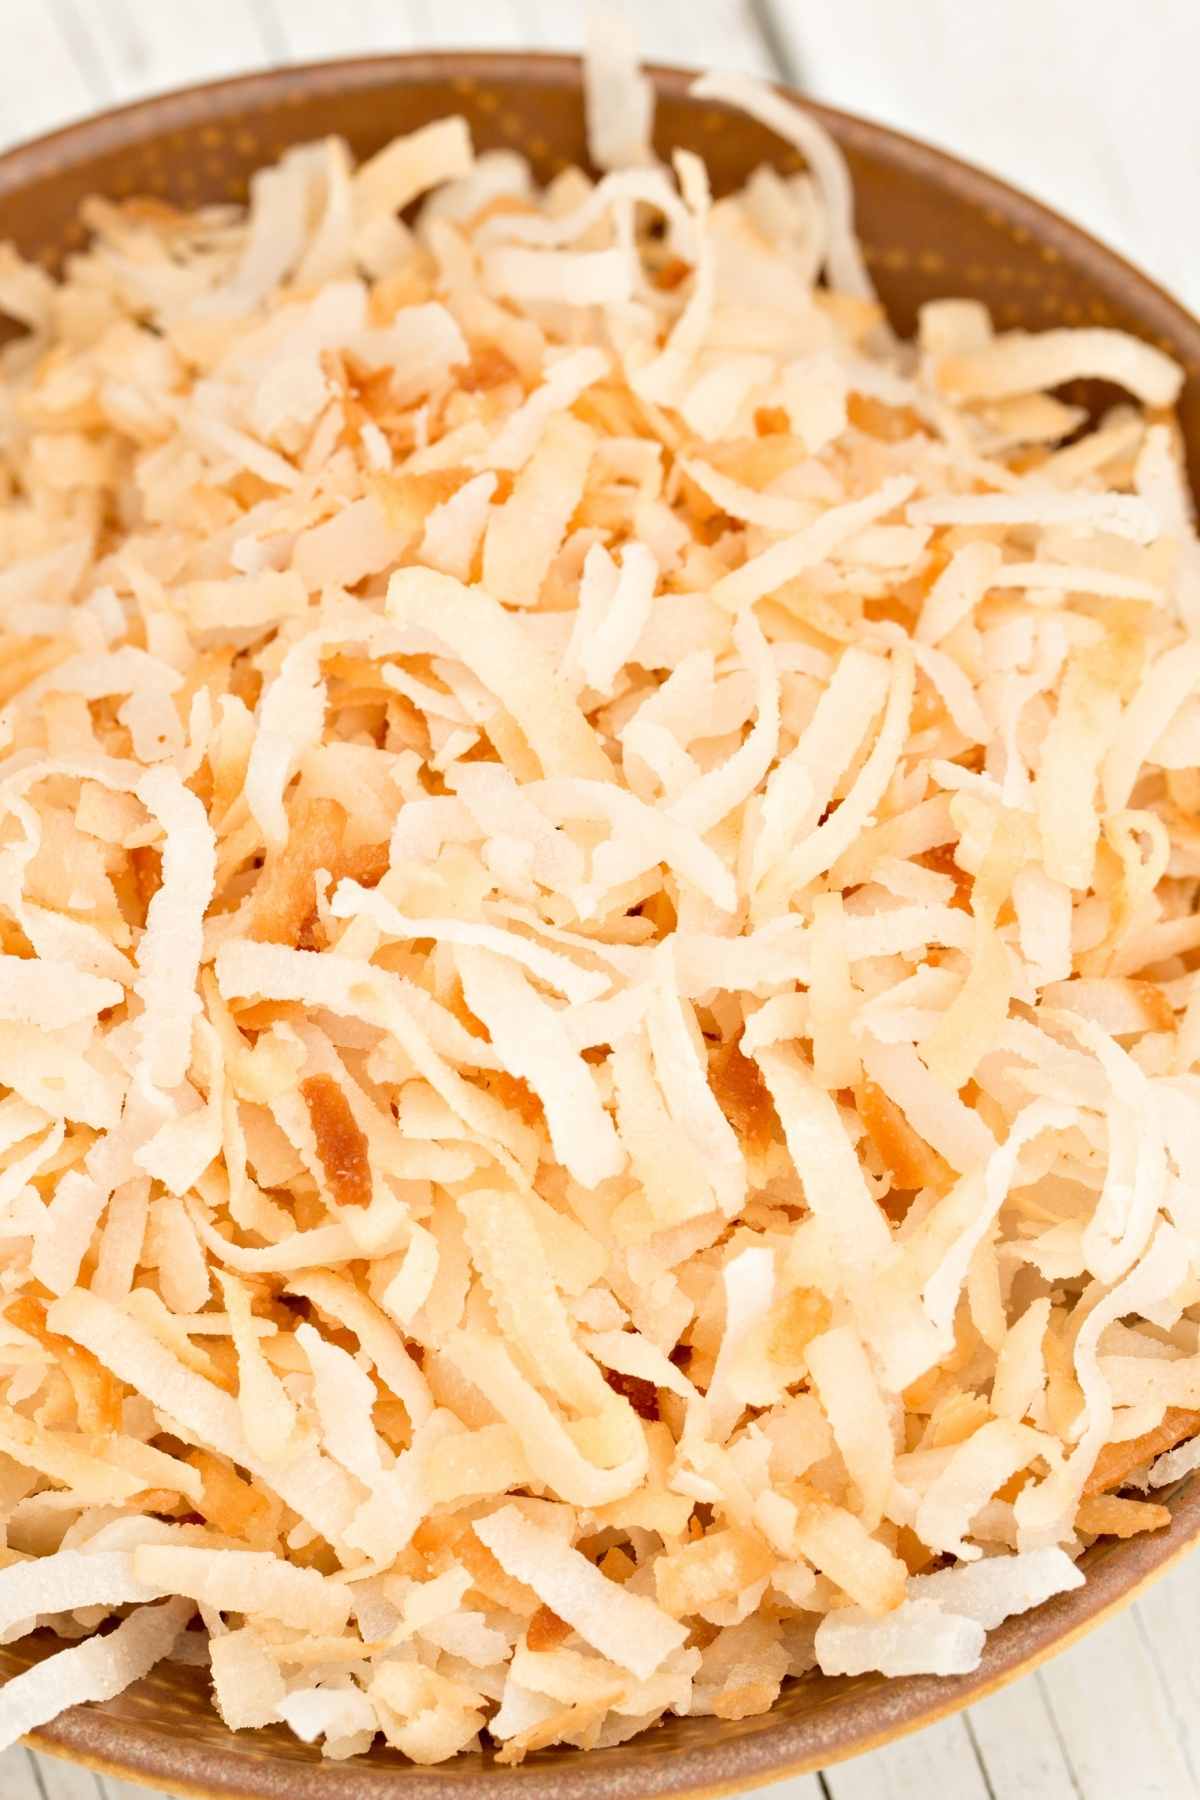 Toasted coconut adds a unique flavor to desserts, from cupcakes and muffins to parfaits and ice cream. But it’s also delicious in yogurt, cereals, and salads.